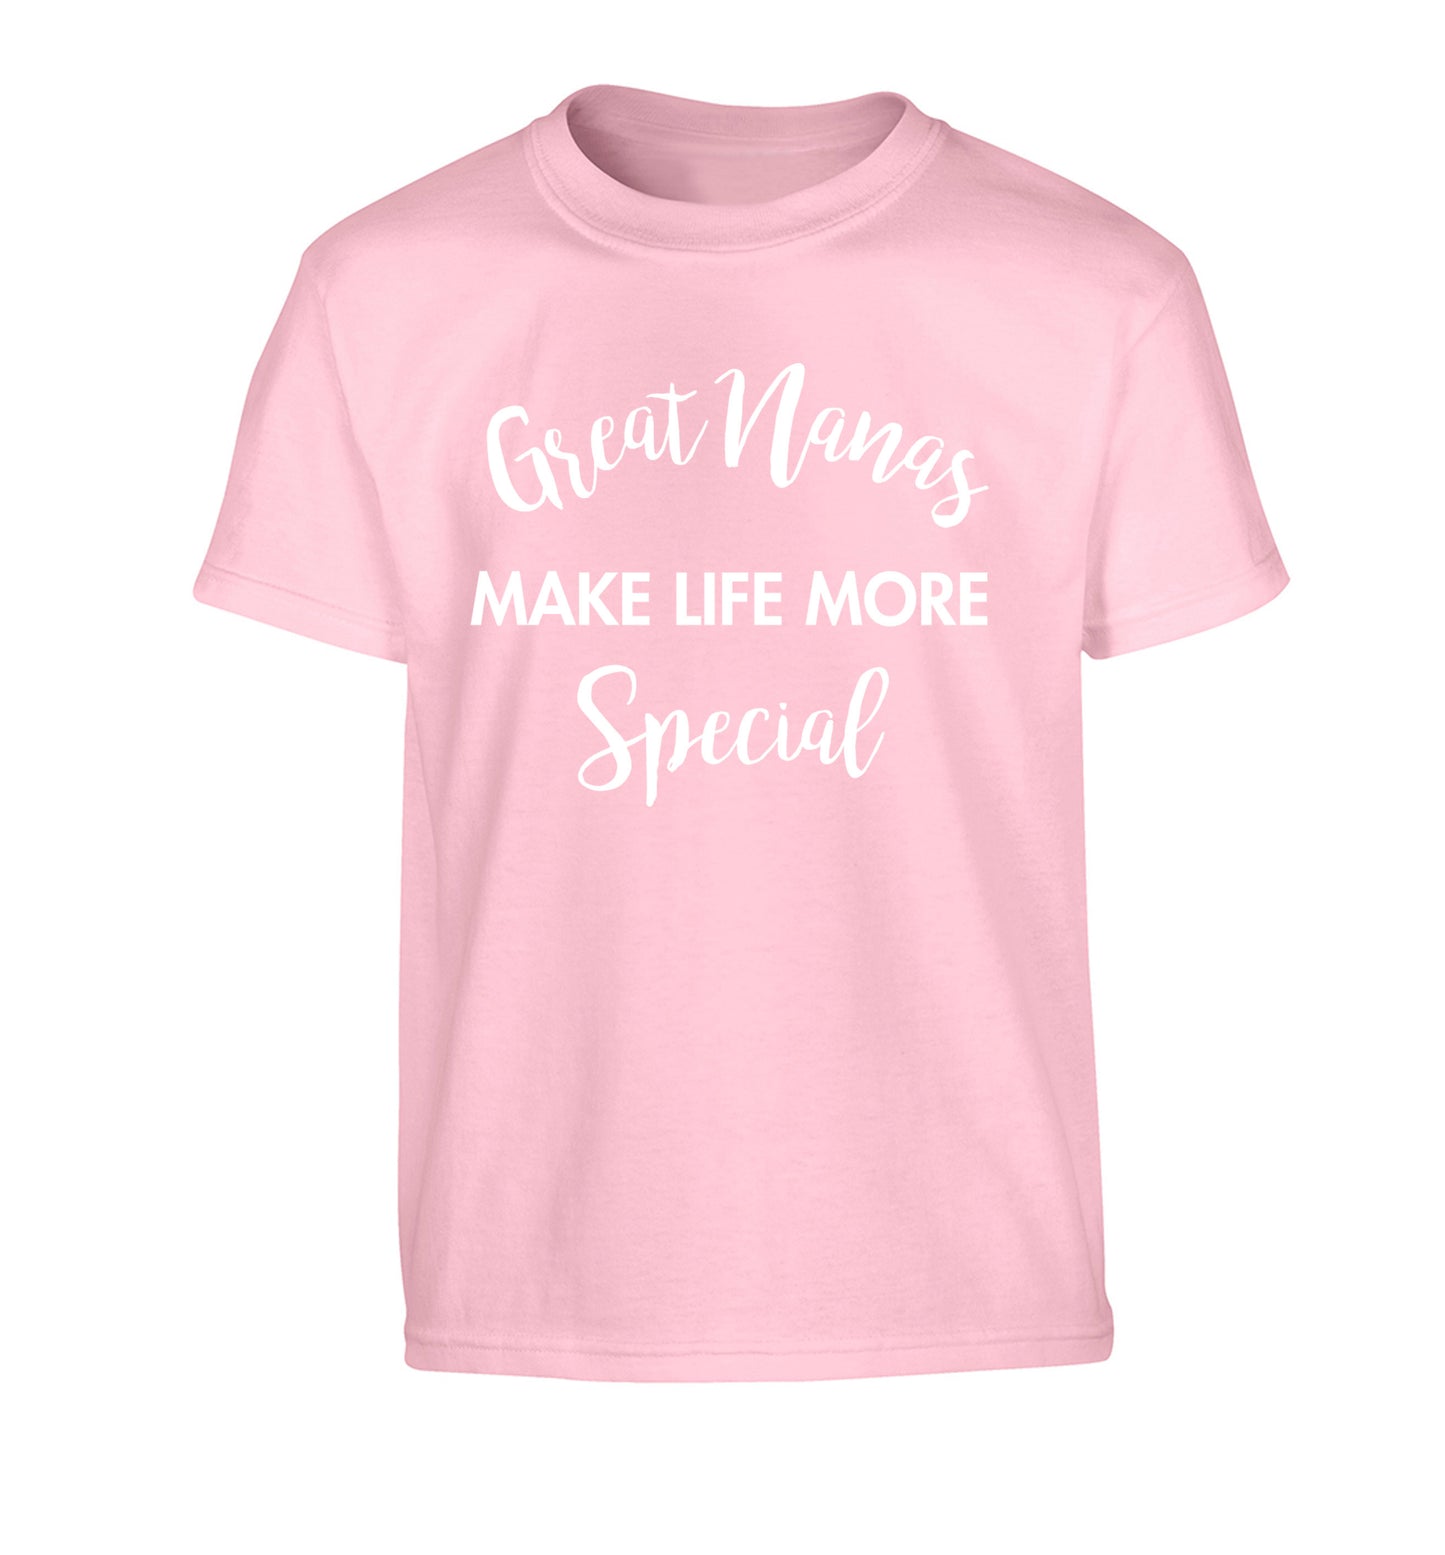 Great nanas make life more special Children's light pink Tshirt 12-14 Years